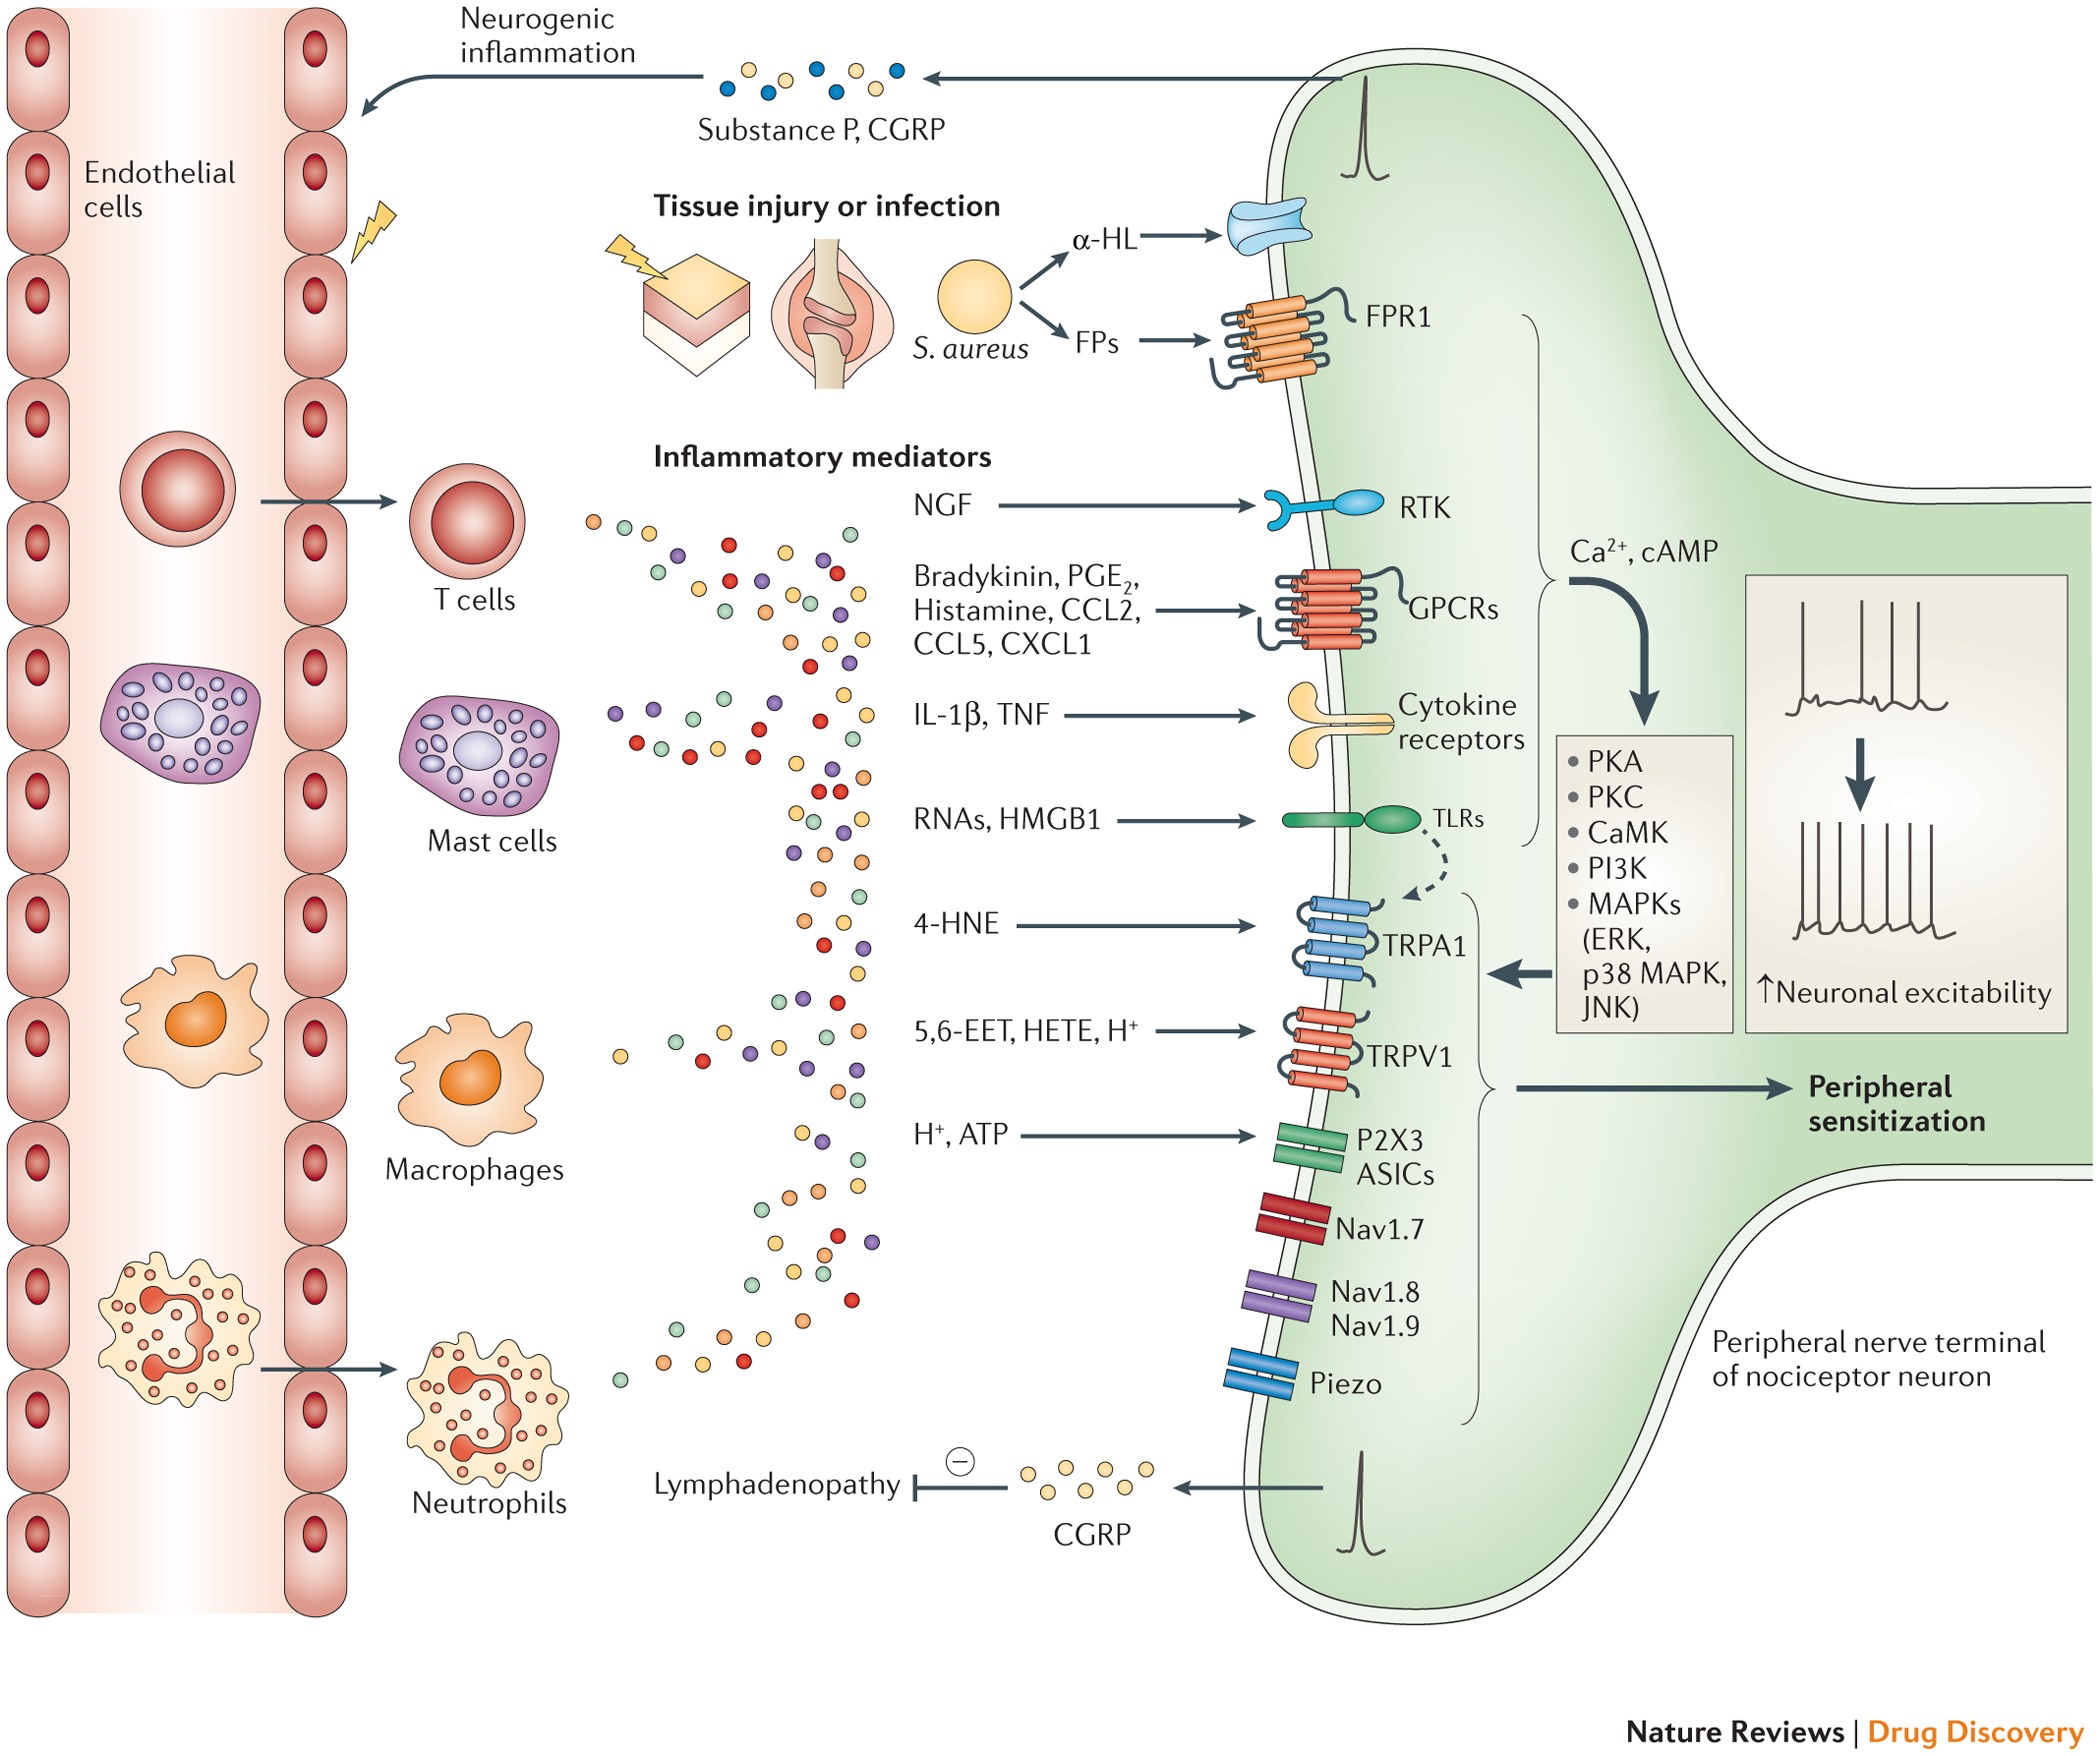 Nature Reviews Drug Discovery - Here